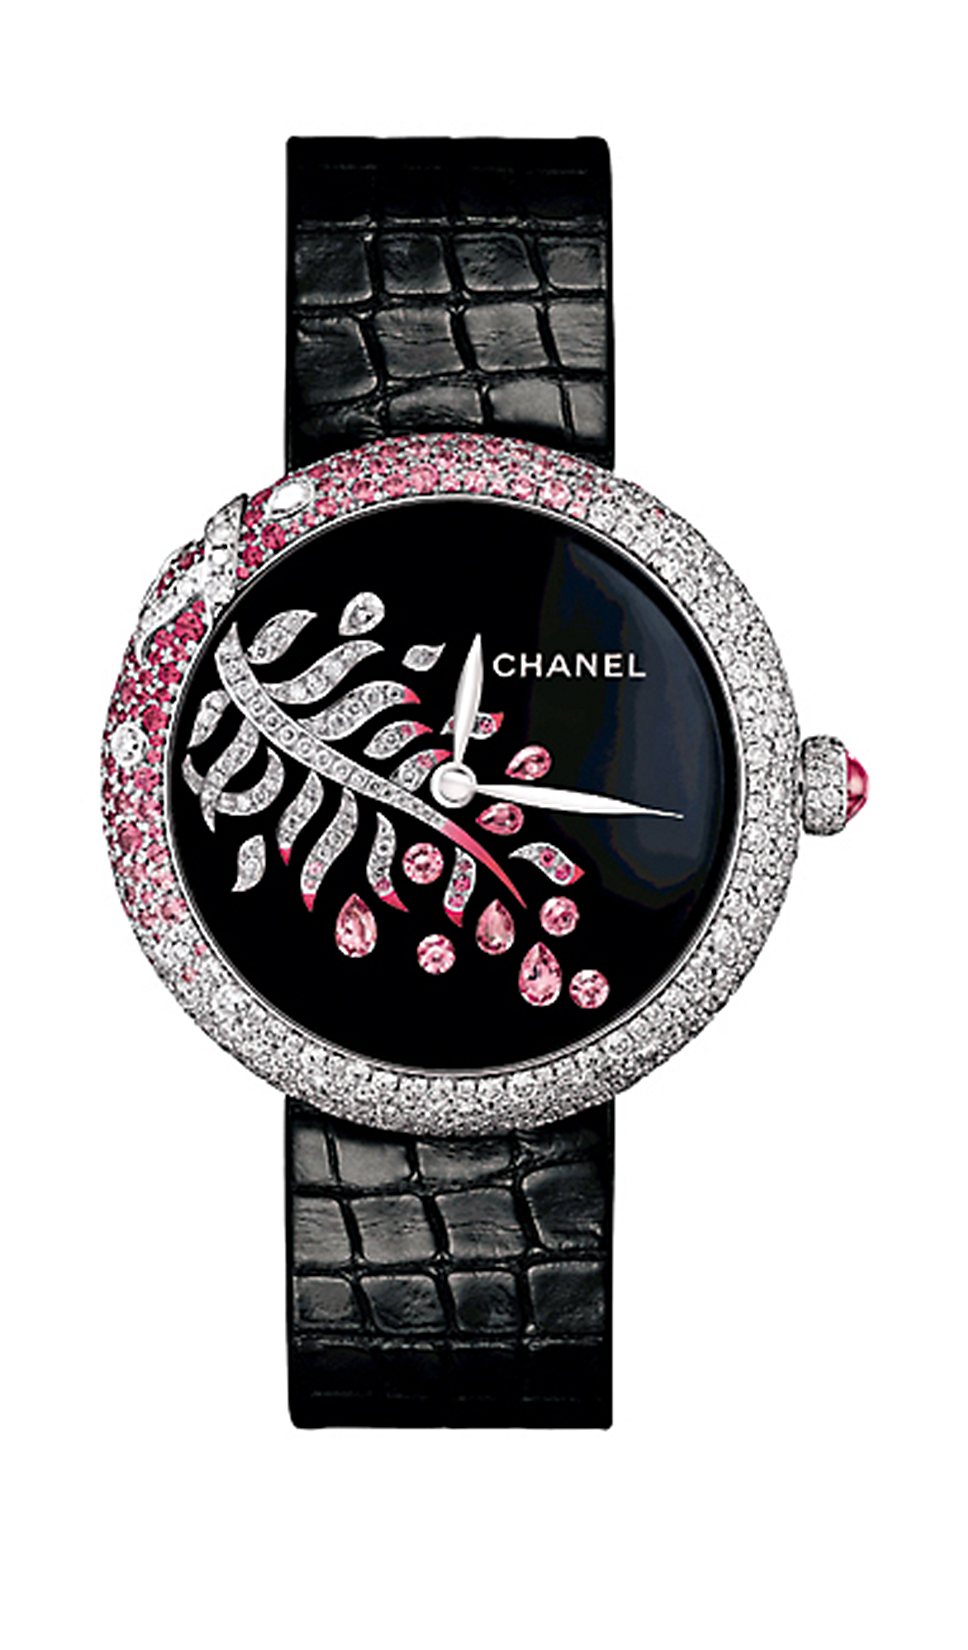 Chanel / Mademoiselle Prive Plume